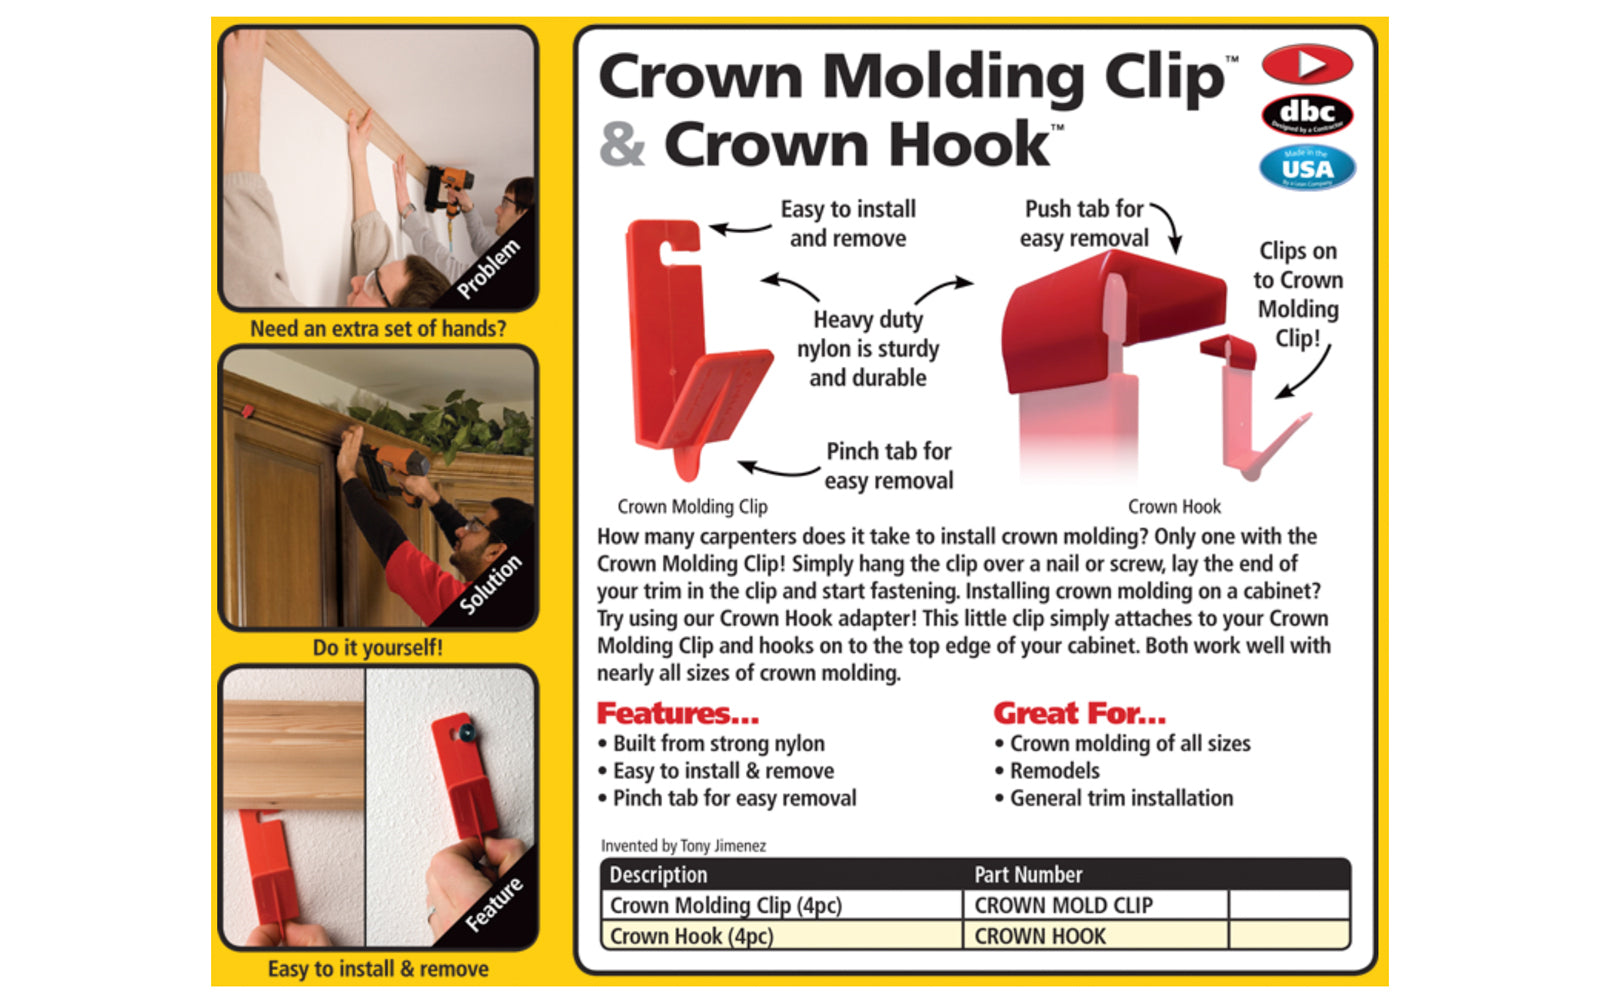 FastCap Crown Molding Hook - 4 Pack - Model No. CROWN HOOK ~ allows you to install crown molding easily to the tops of cabinets & other "off the wall" structures